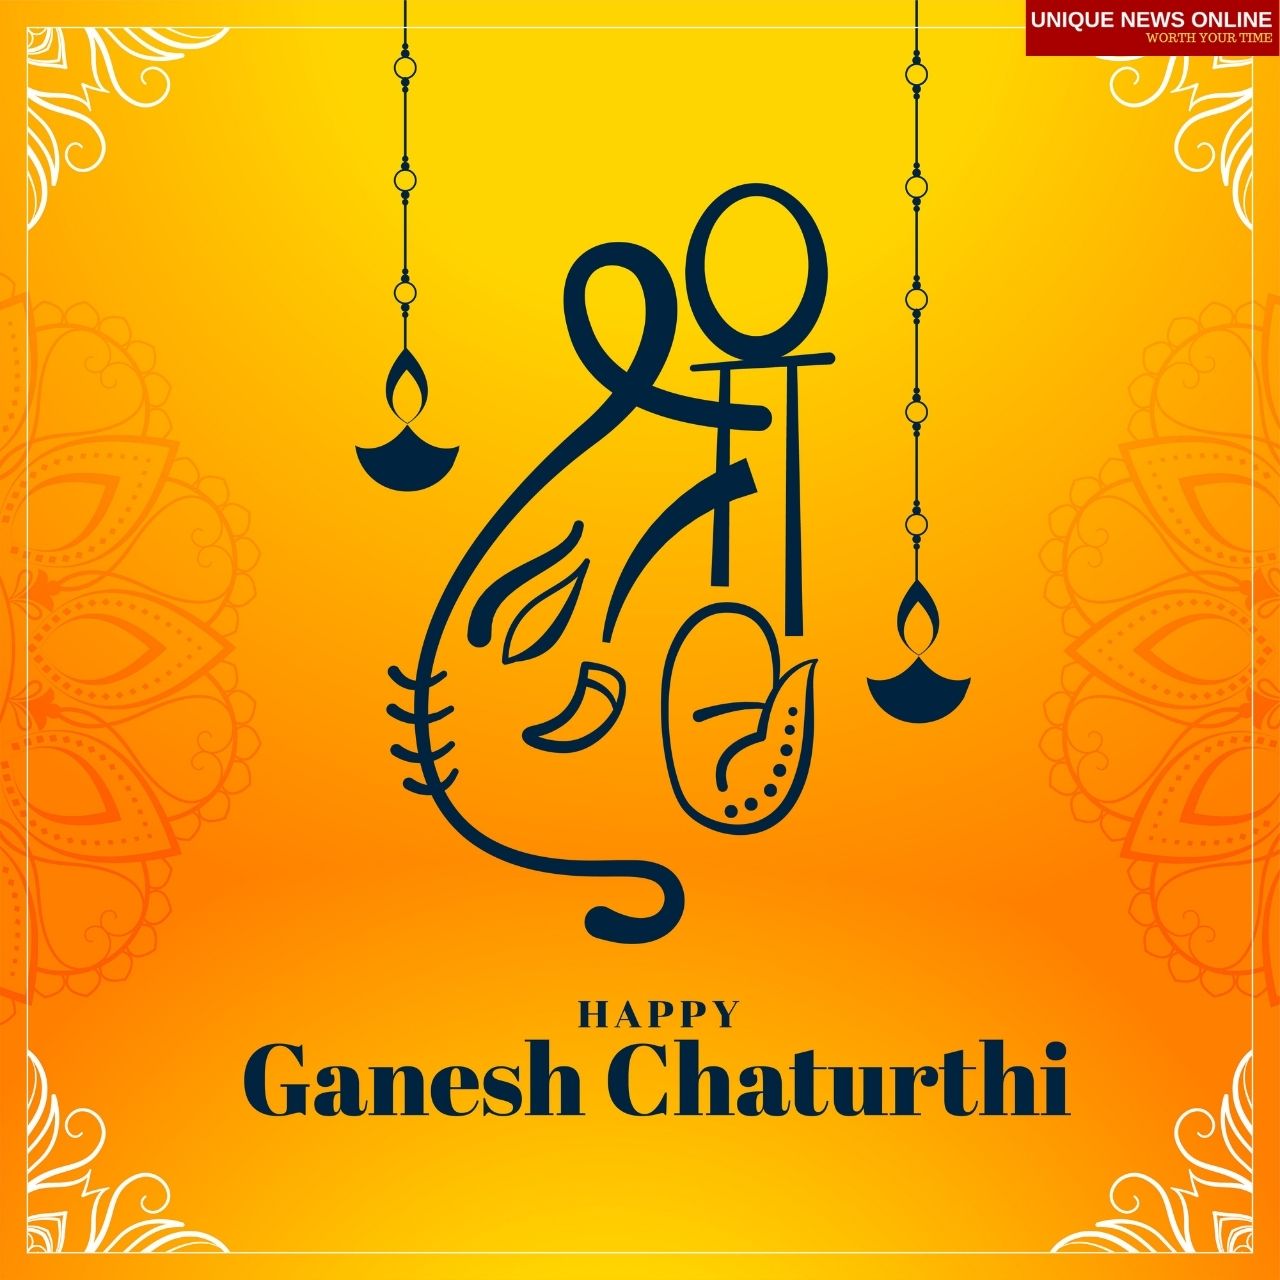 Ganesh Chaturthi 2021 Wishes, Quotes, HD Images, Greetings, Messages, and Stickers to greet your Loved Ones through WhatsApp